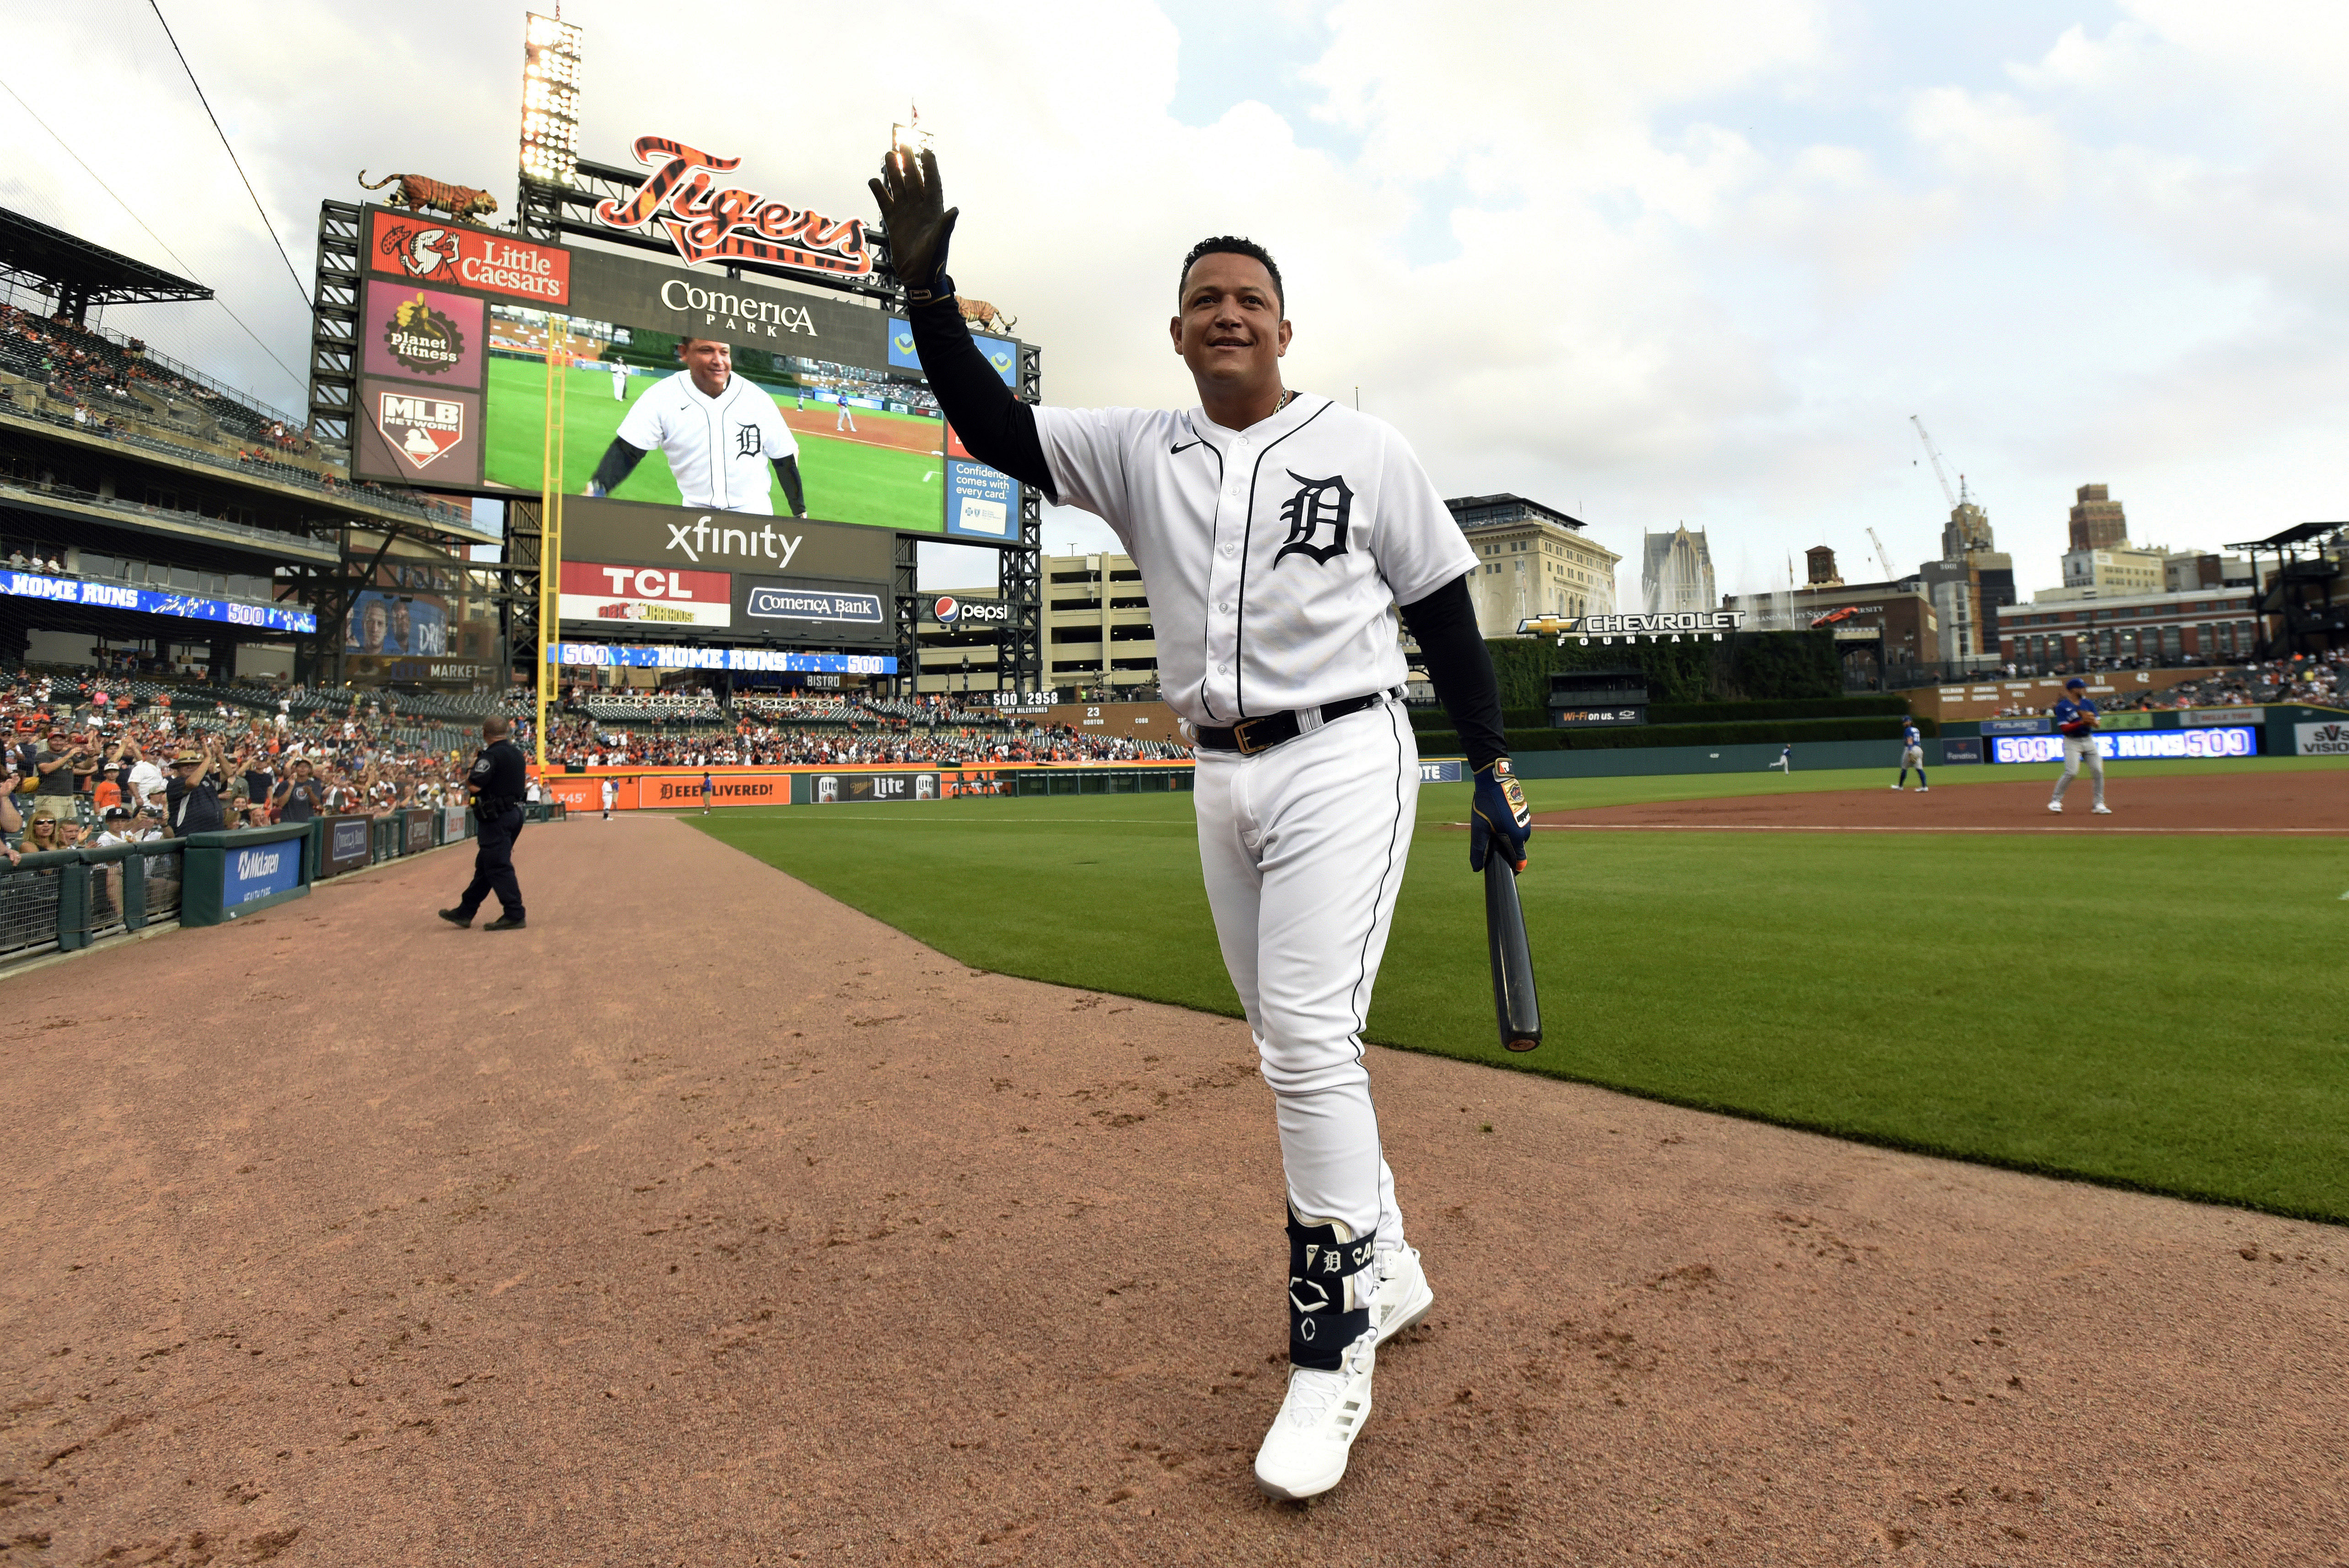 Miguel Cabrera's family flips milestone tracker to 500 as fans